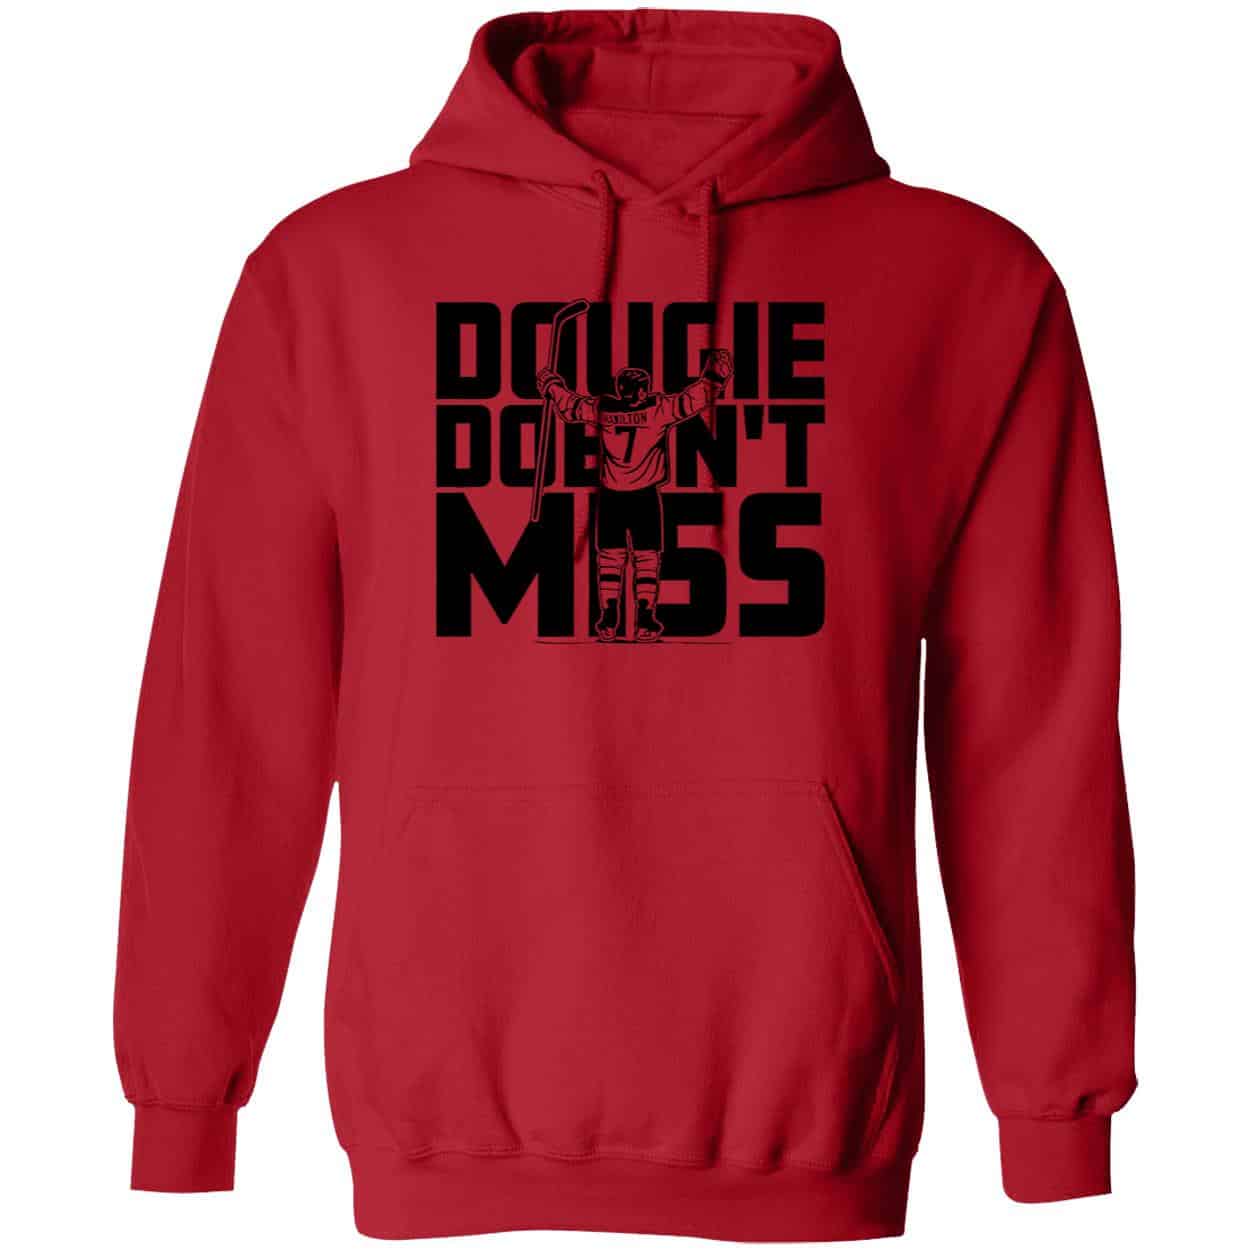 Official Dougie hamilton dougie doesn't miss shirt, hoodie